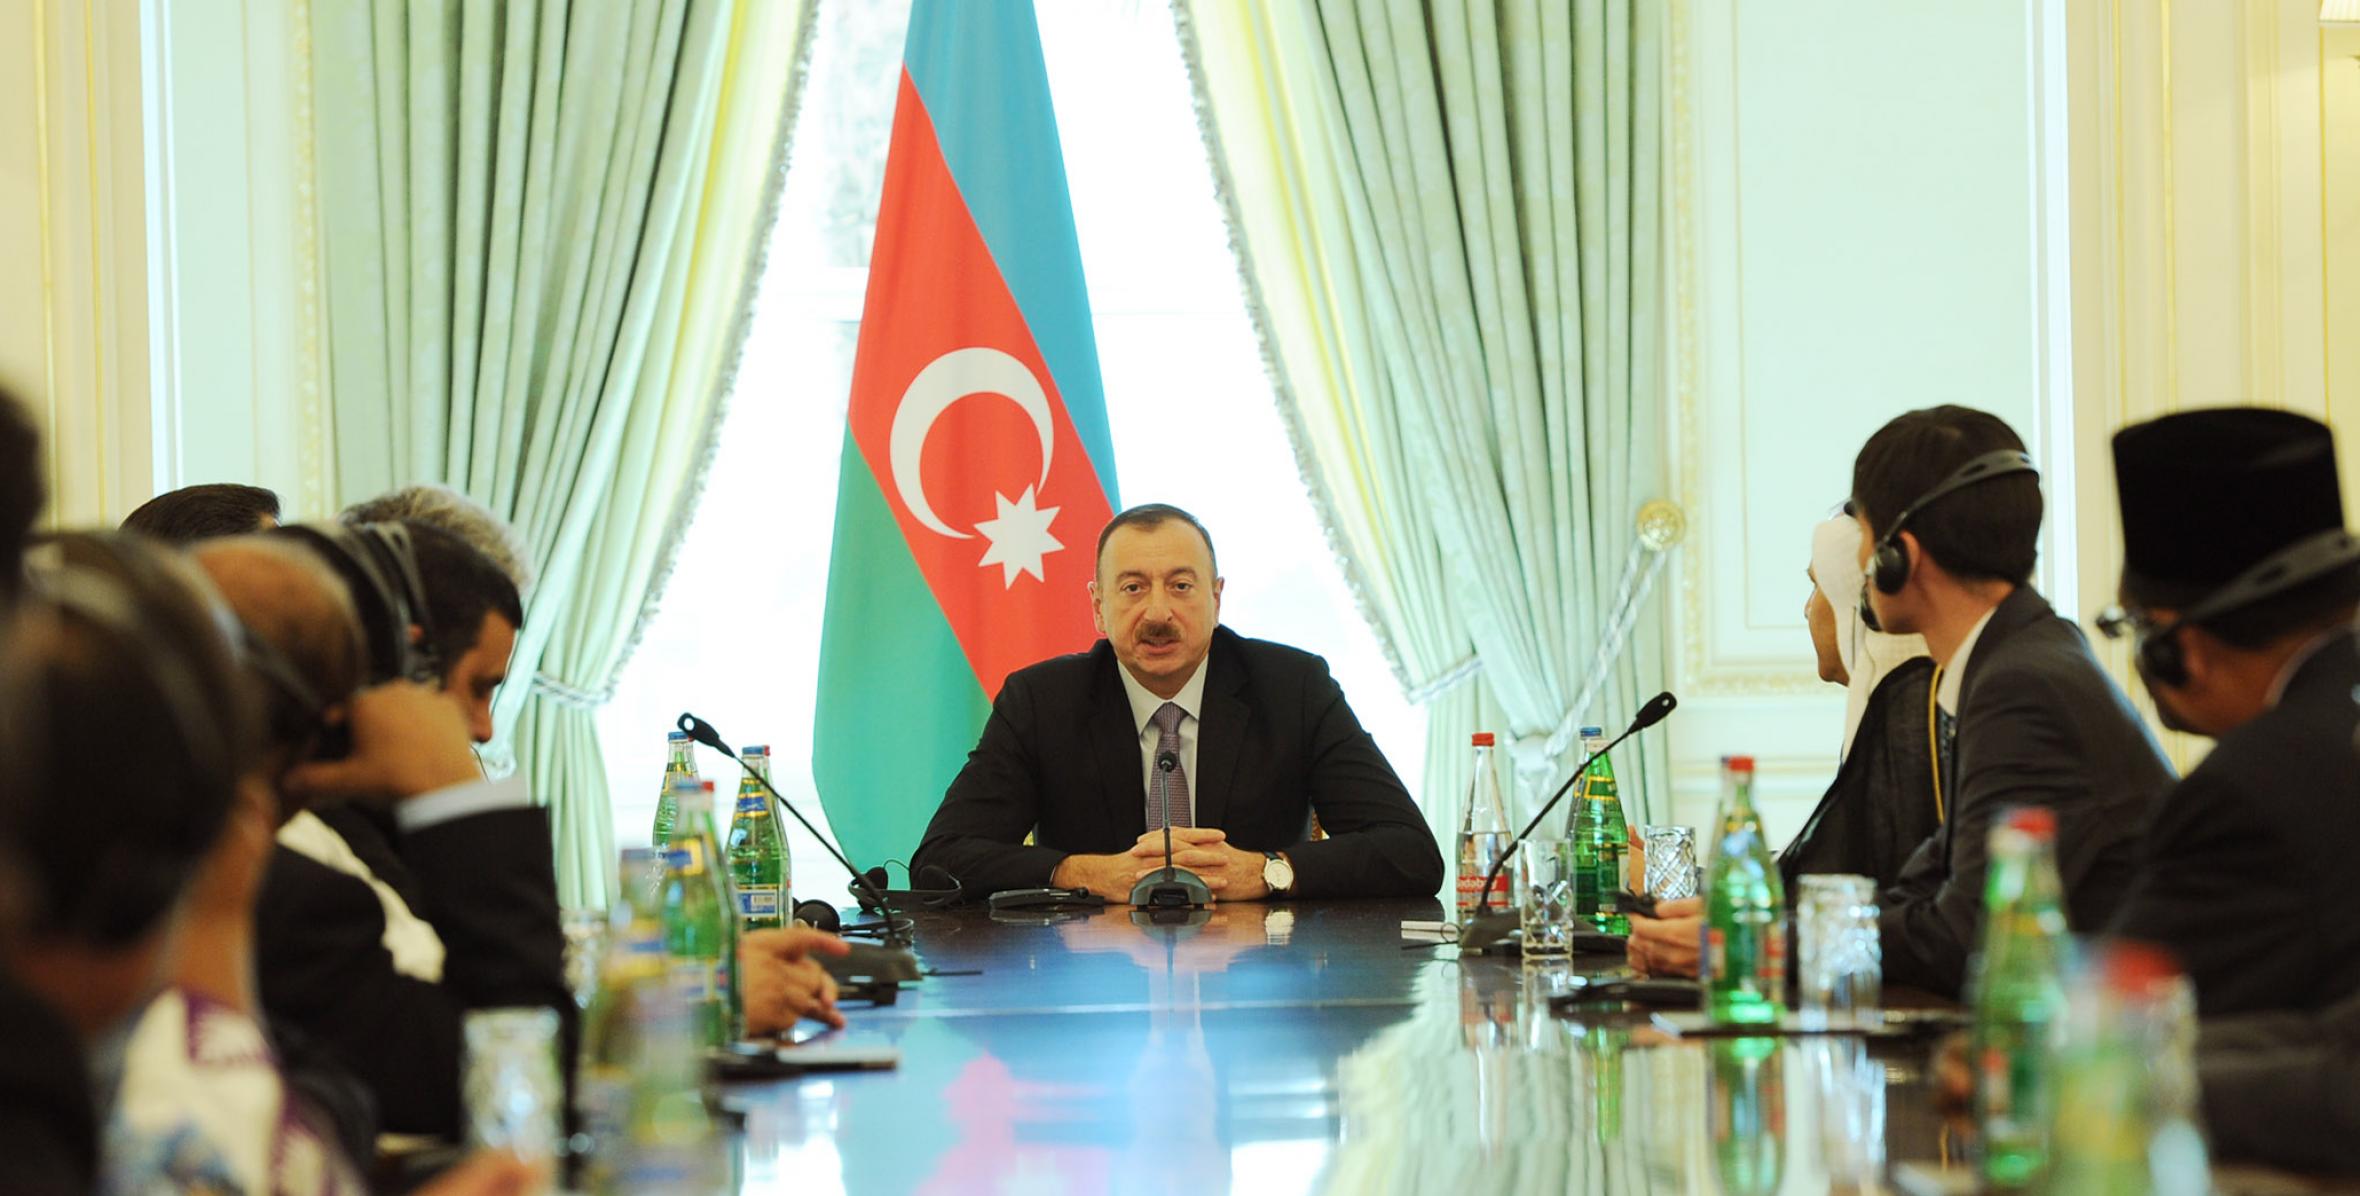 Ilham Aliyev received participants of the Baku Conference of Ministers of Labor of the Organization of Islamic Cooperation